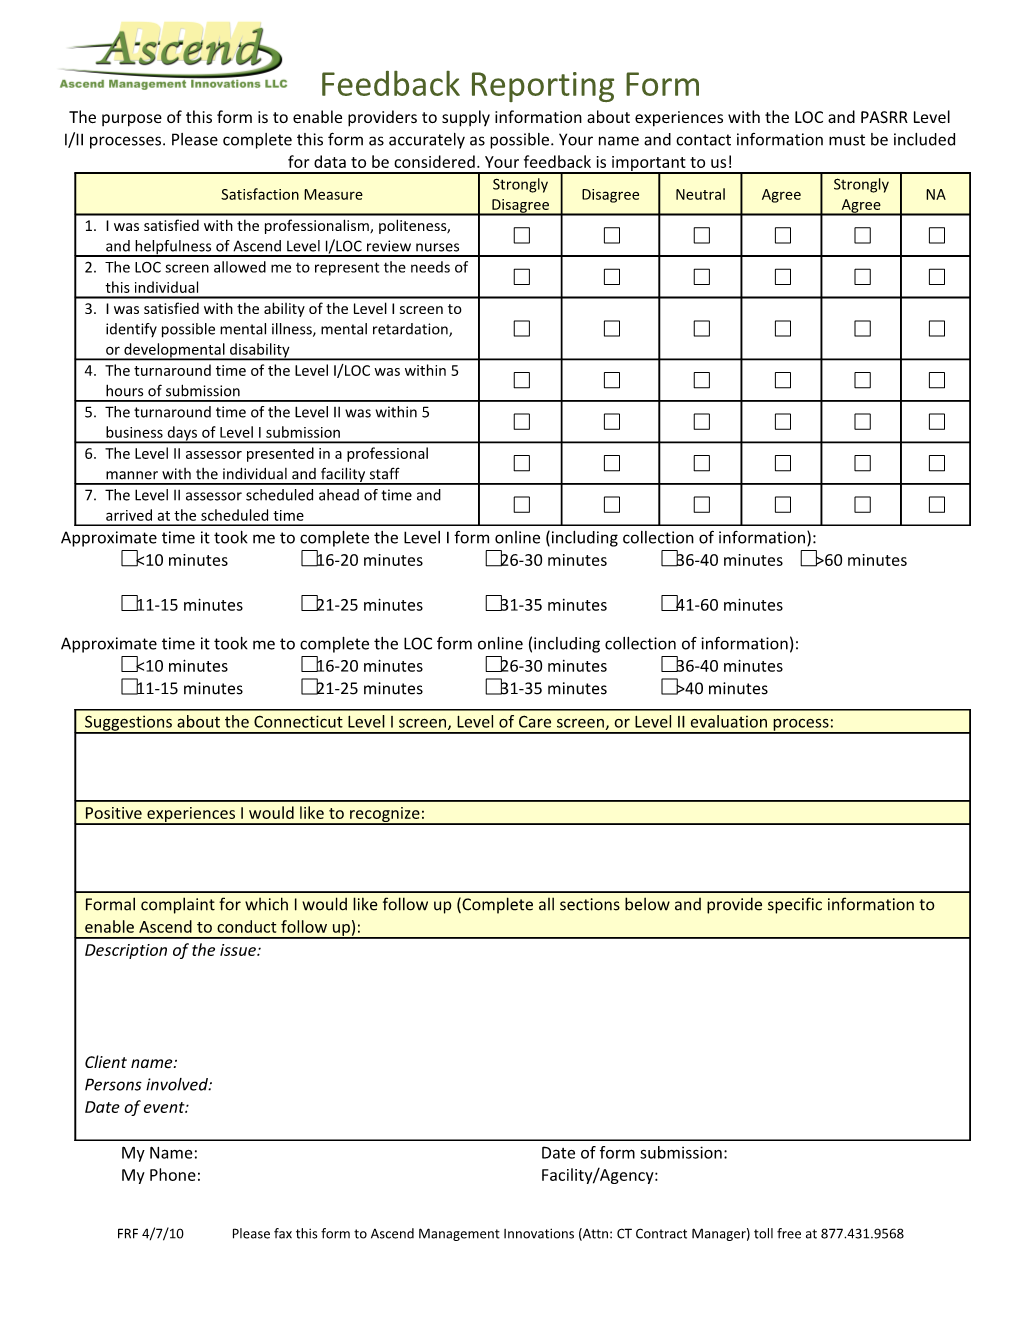 Feedback Reporting Form the Purpose of This Form Is to Enable Providers to Supply Information